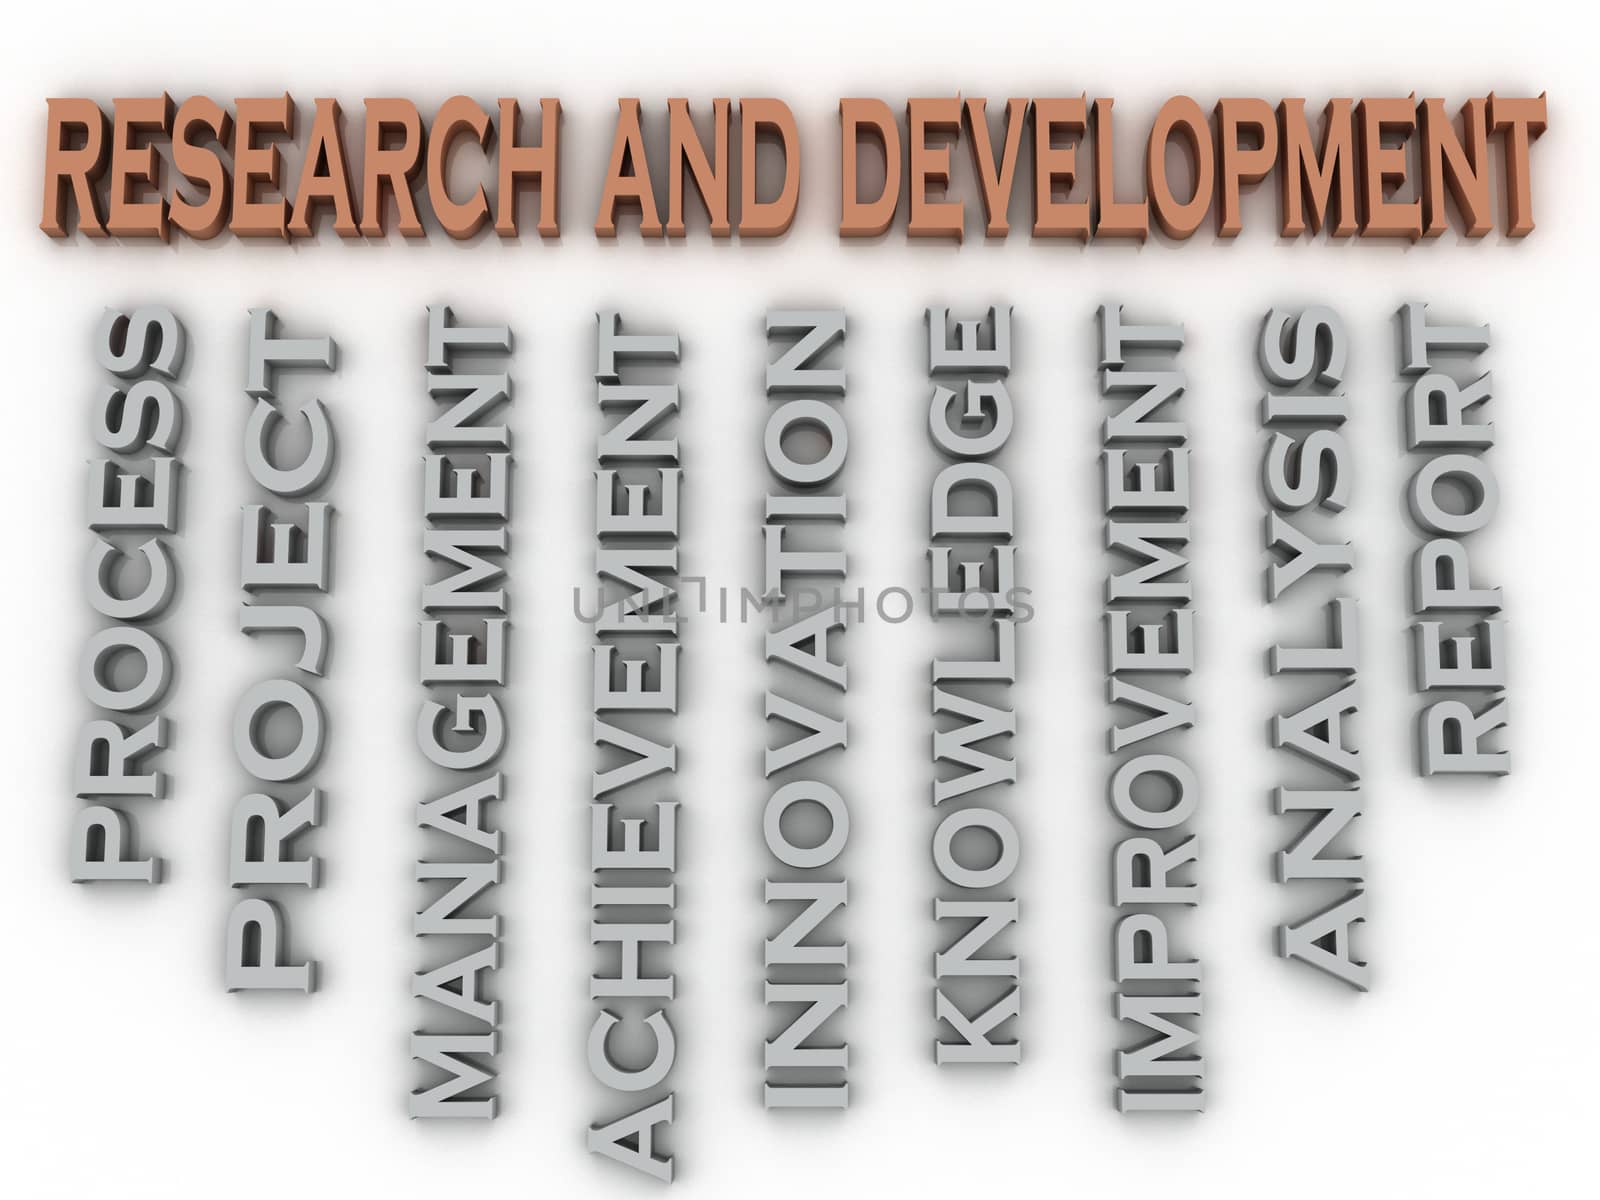 3d image research and development issues concept word cloud ba by dacasdo